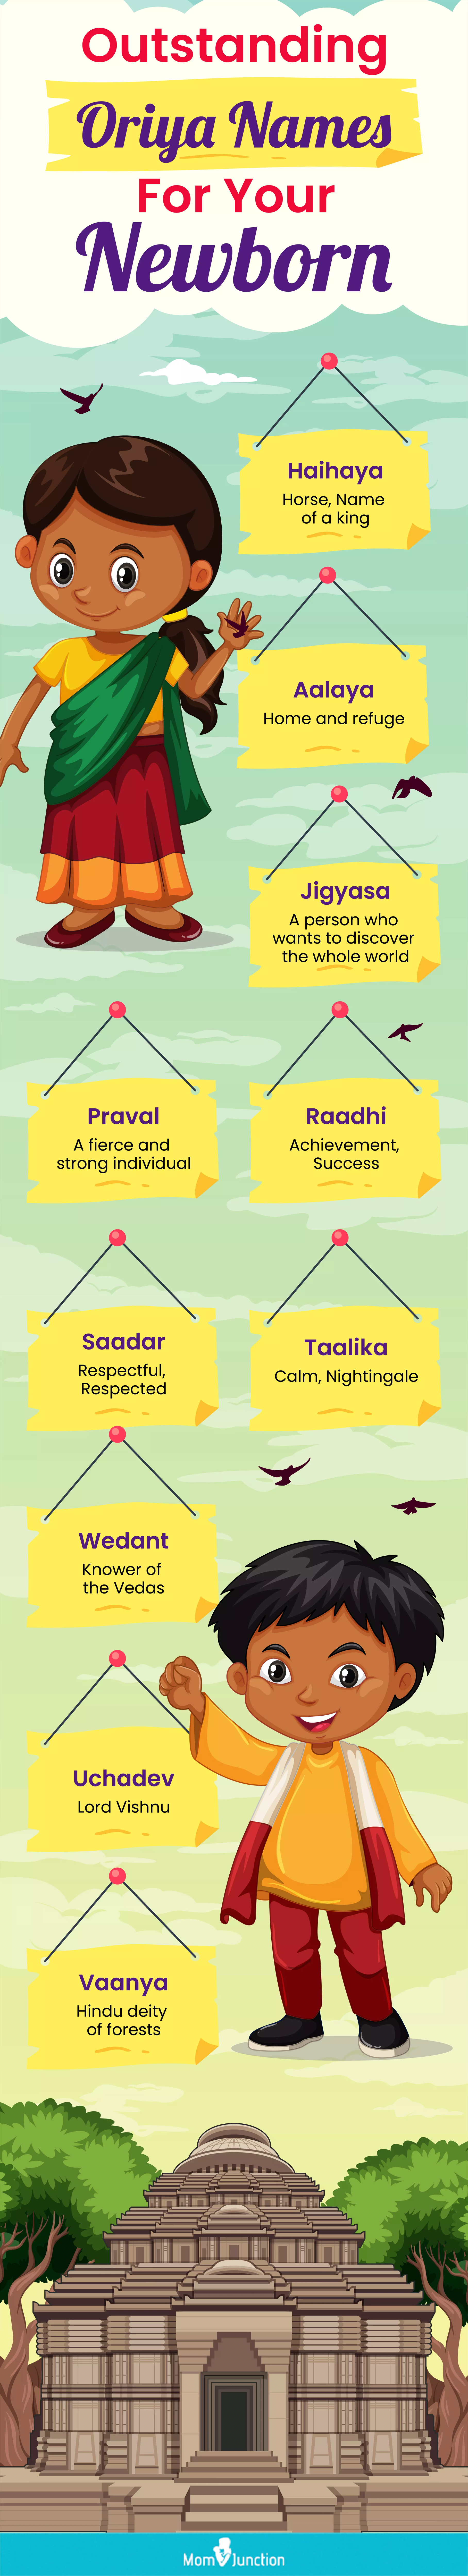 outstanding oriya names for your newborn (infographic)